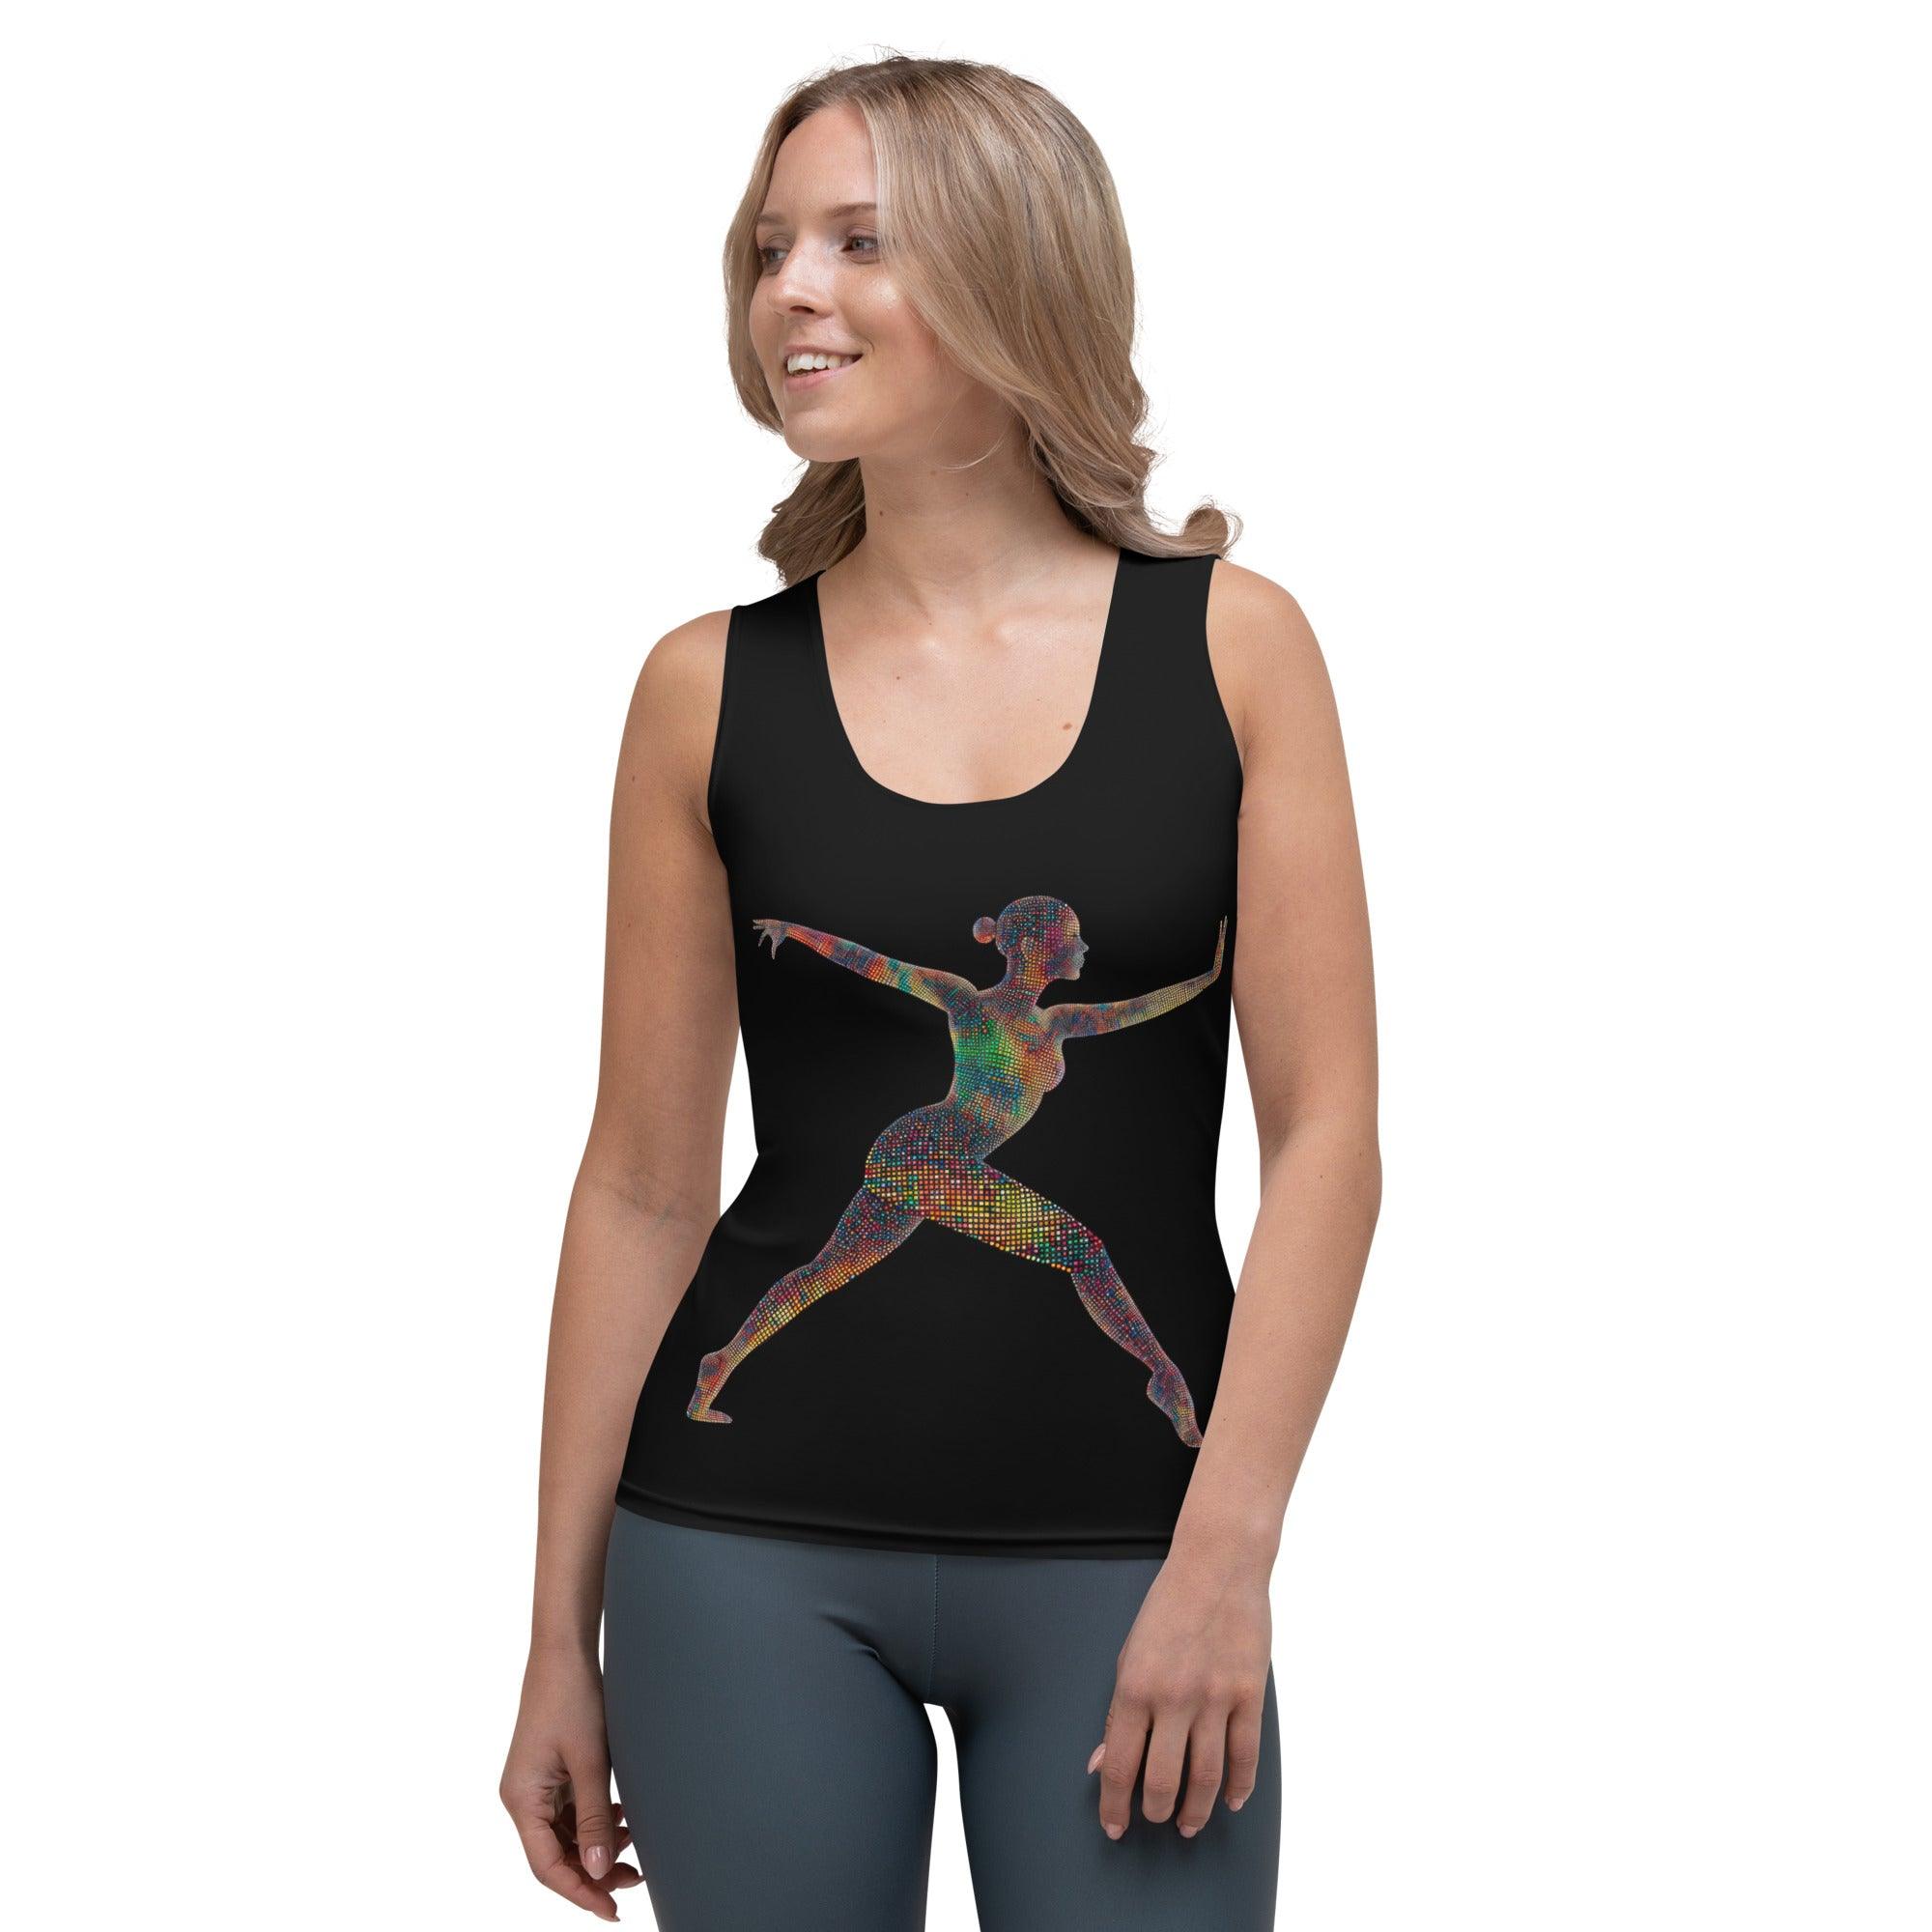 Balletic Elegance Fashion Tank Top in Vibrant Sublimation Print